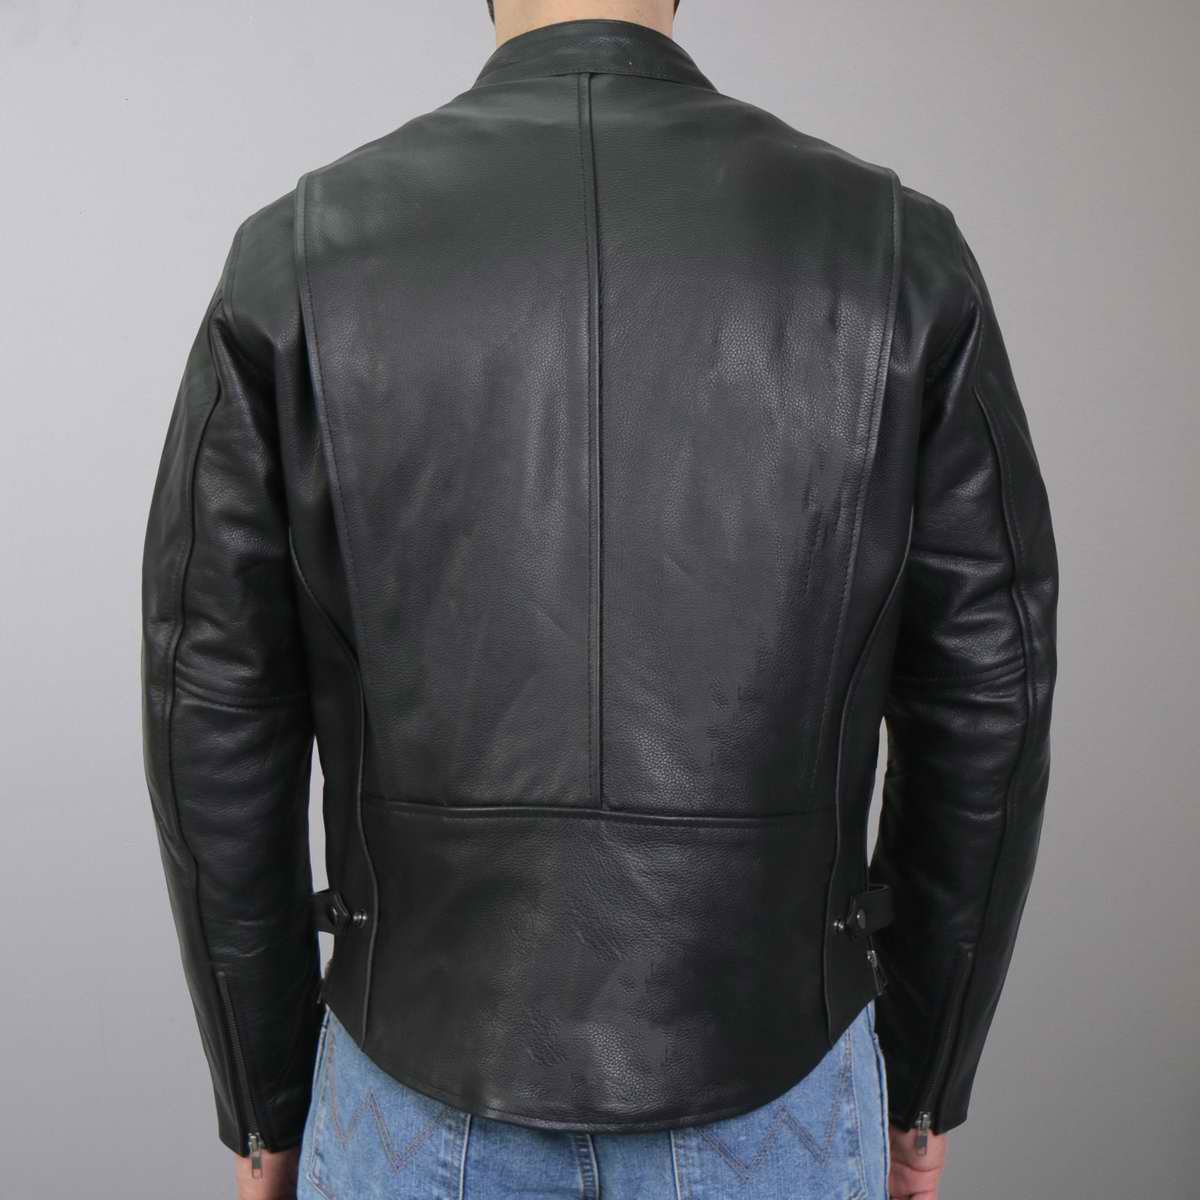 Hot Leathers JKM1027 Men’s Black ‘Carry and Conceal’ Leather Jacket